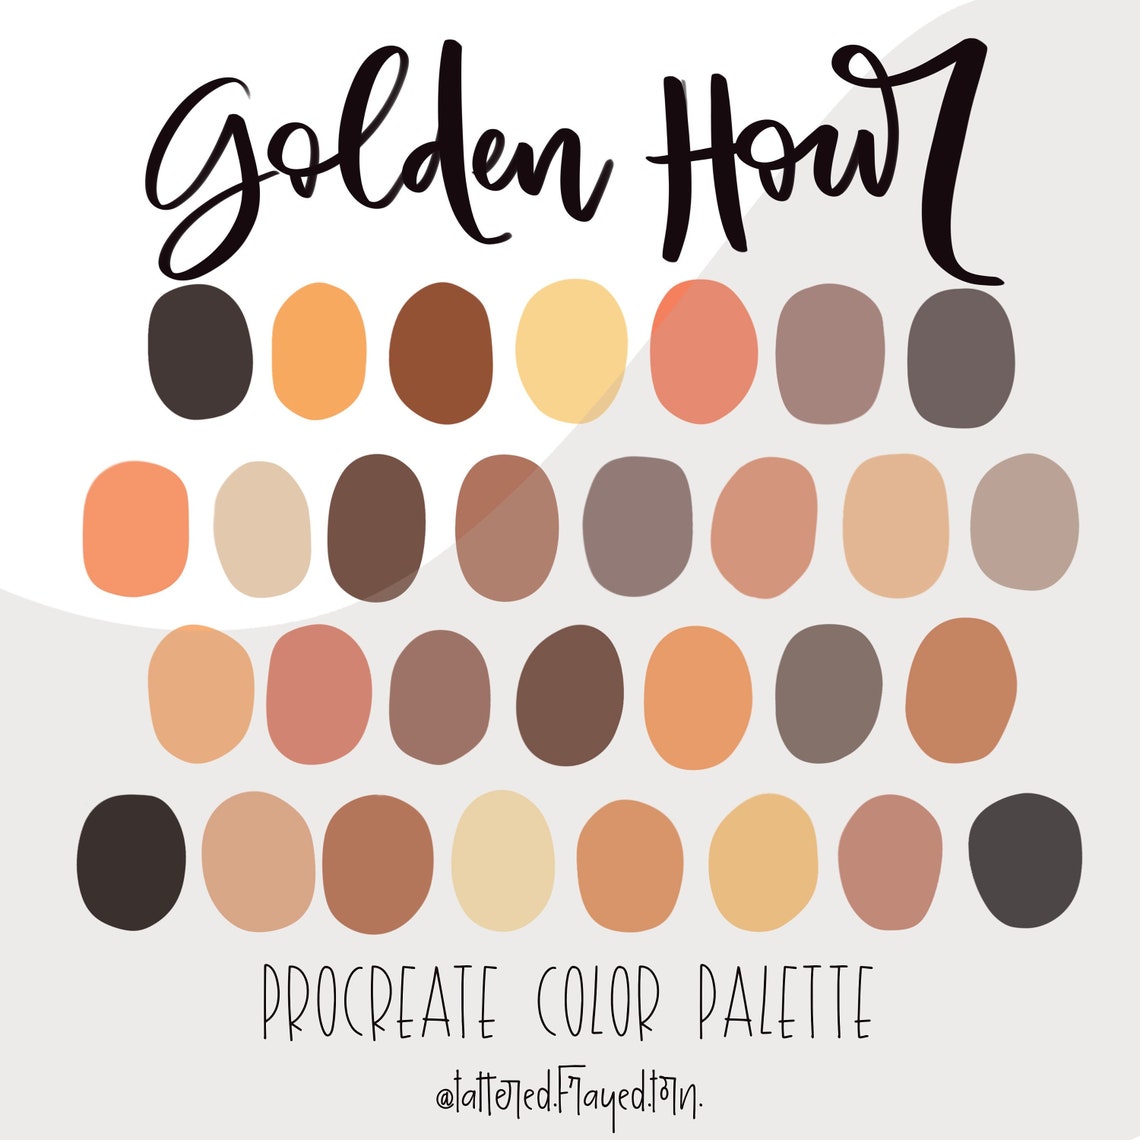 Golden Hour Procreate Palette/Color Swatches/Instant Download | Etsy